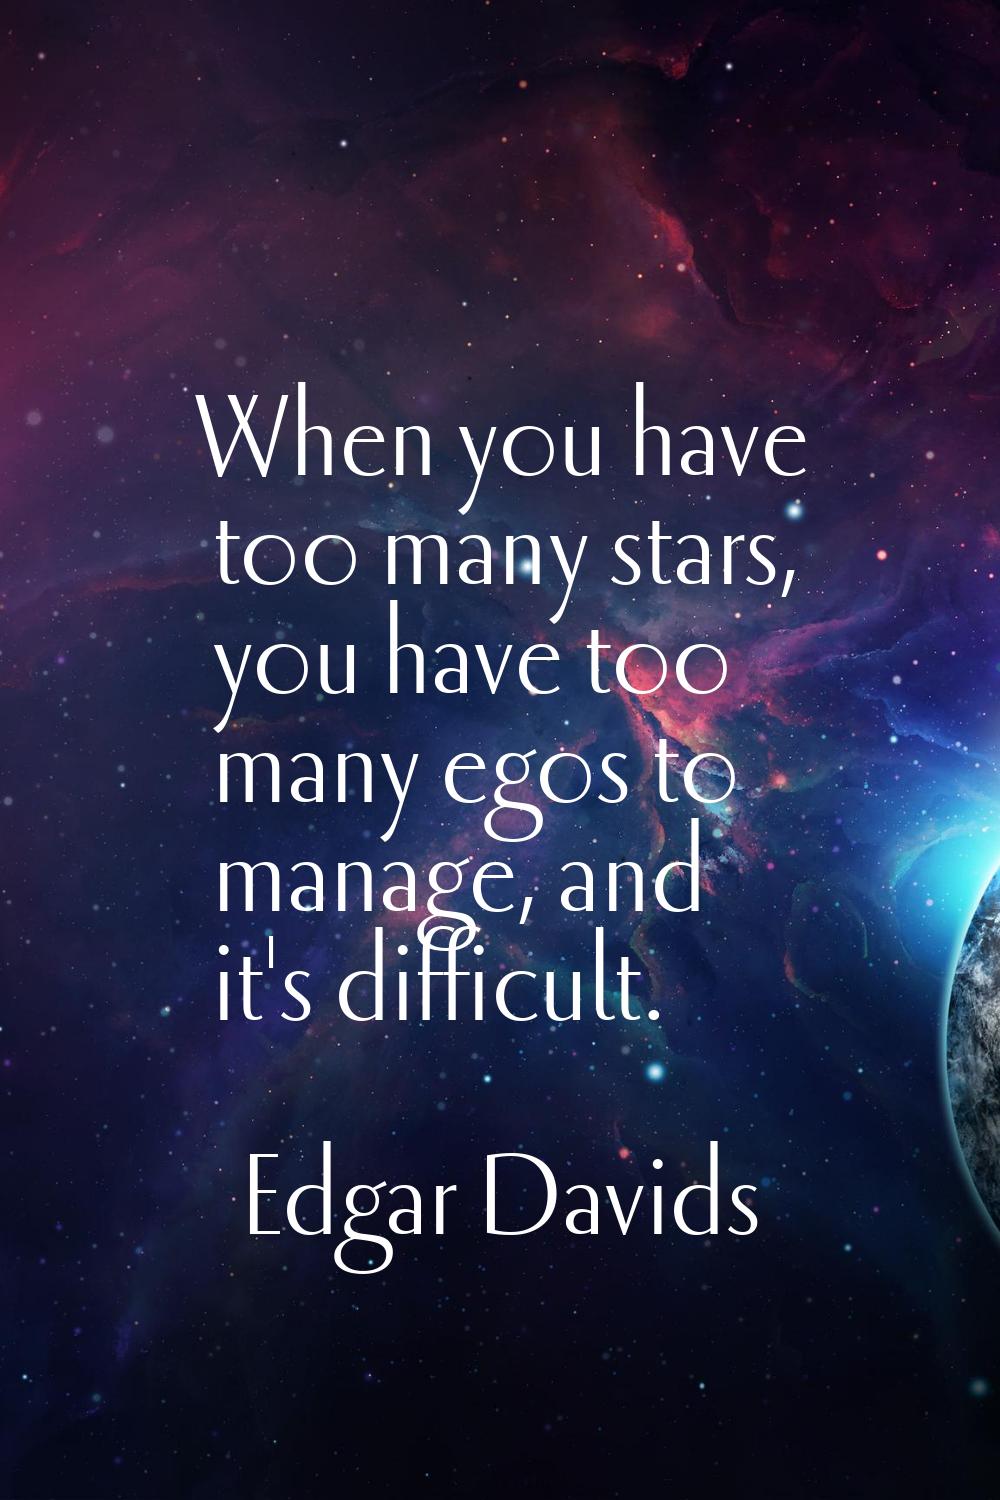 When you have too many stars, you have too many egos to manage, and it's difficult.